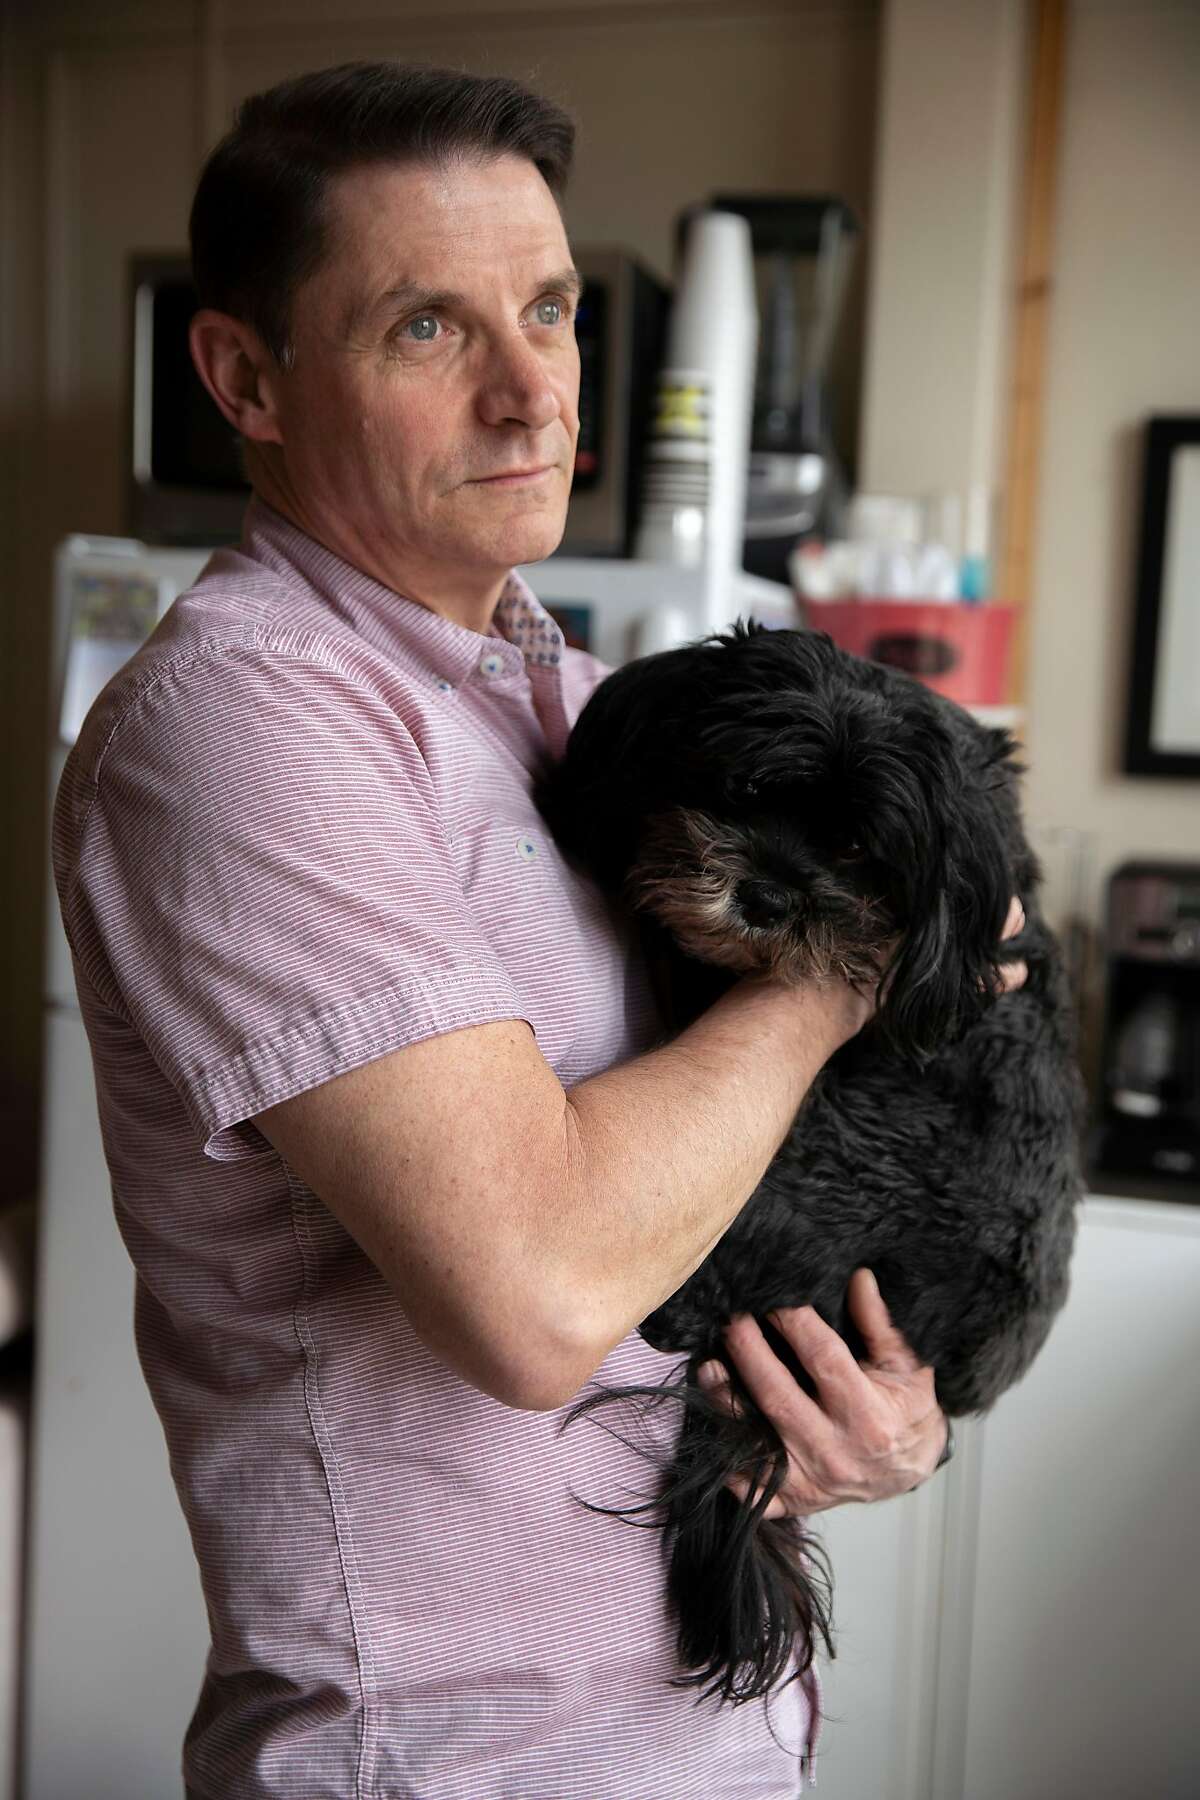 Curtis Bradford with his dog Maggie Mae at his home on Saturday, March 14, 2020, in San Francisco, Calif. Bradford, 55, is HIV positive and part of the population vulnerable to getting sick from the coronavirus. Bradford decided to self isolate on March 6, but has been struggling with the mental and emotional toll of being alone in an SRO without his usual work and community activities.